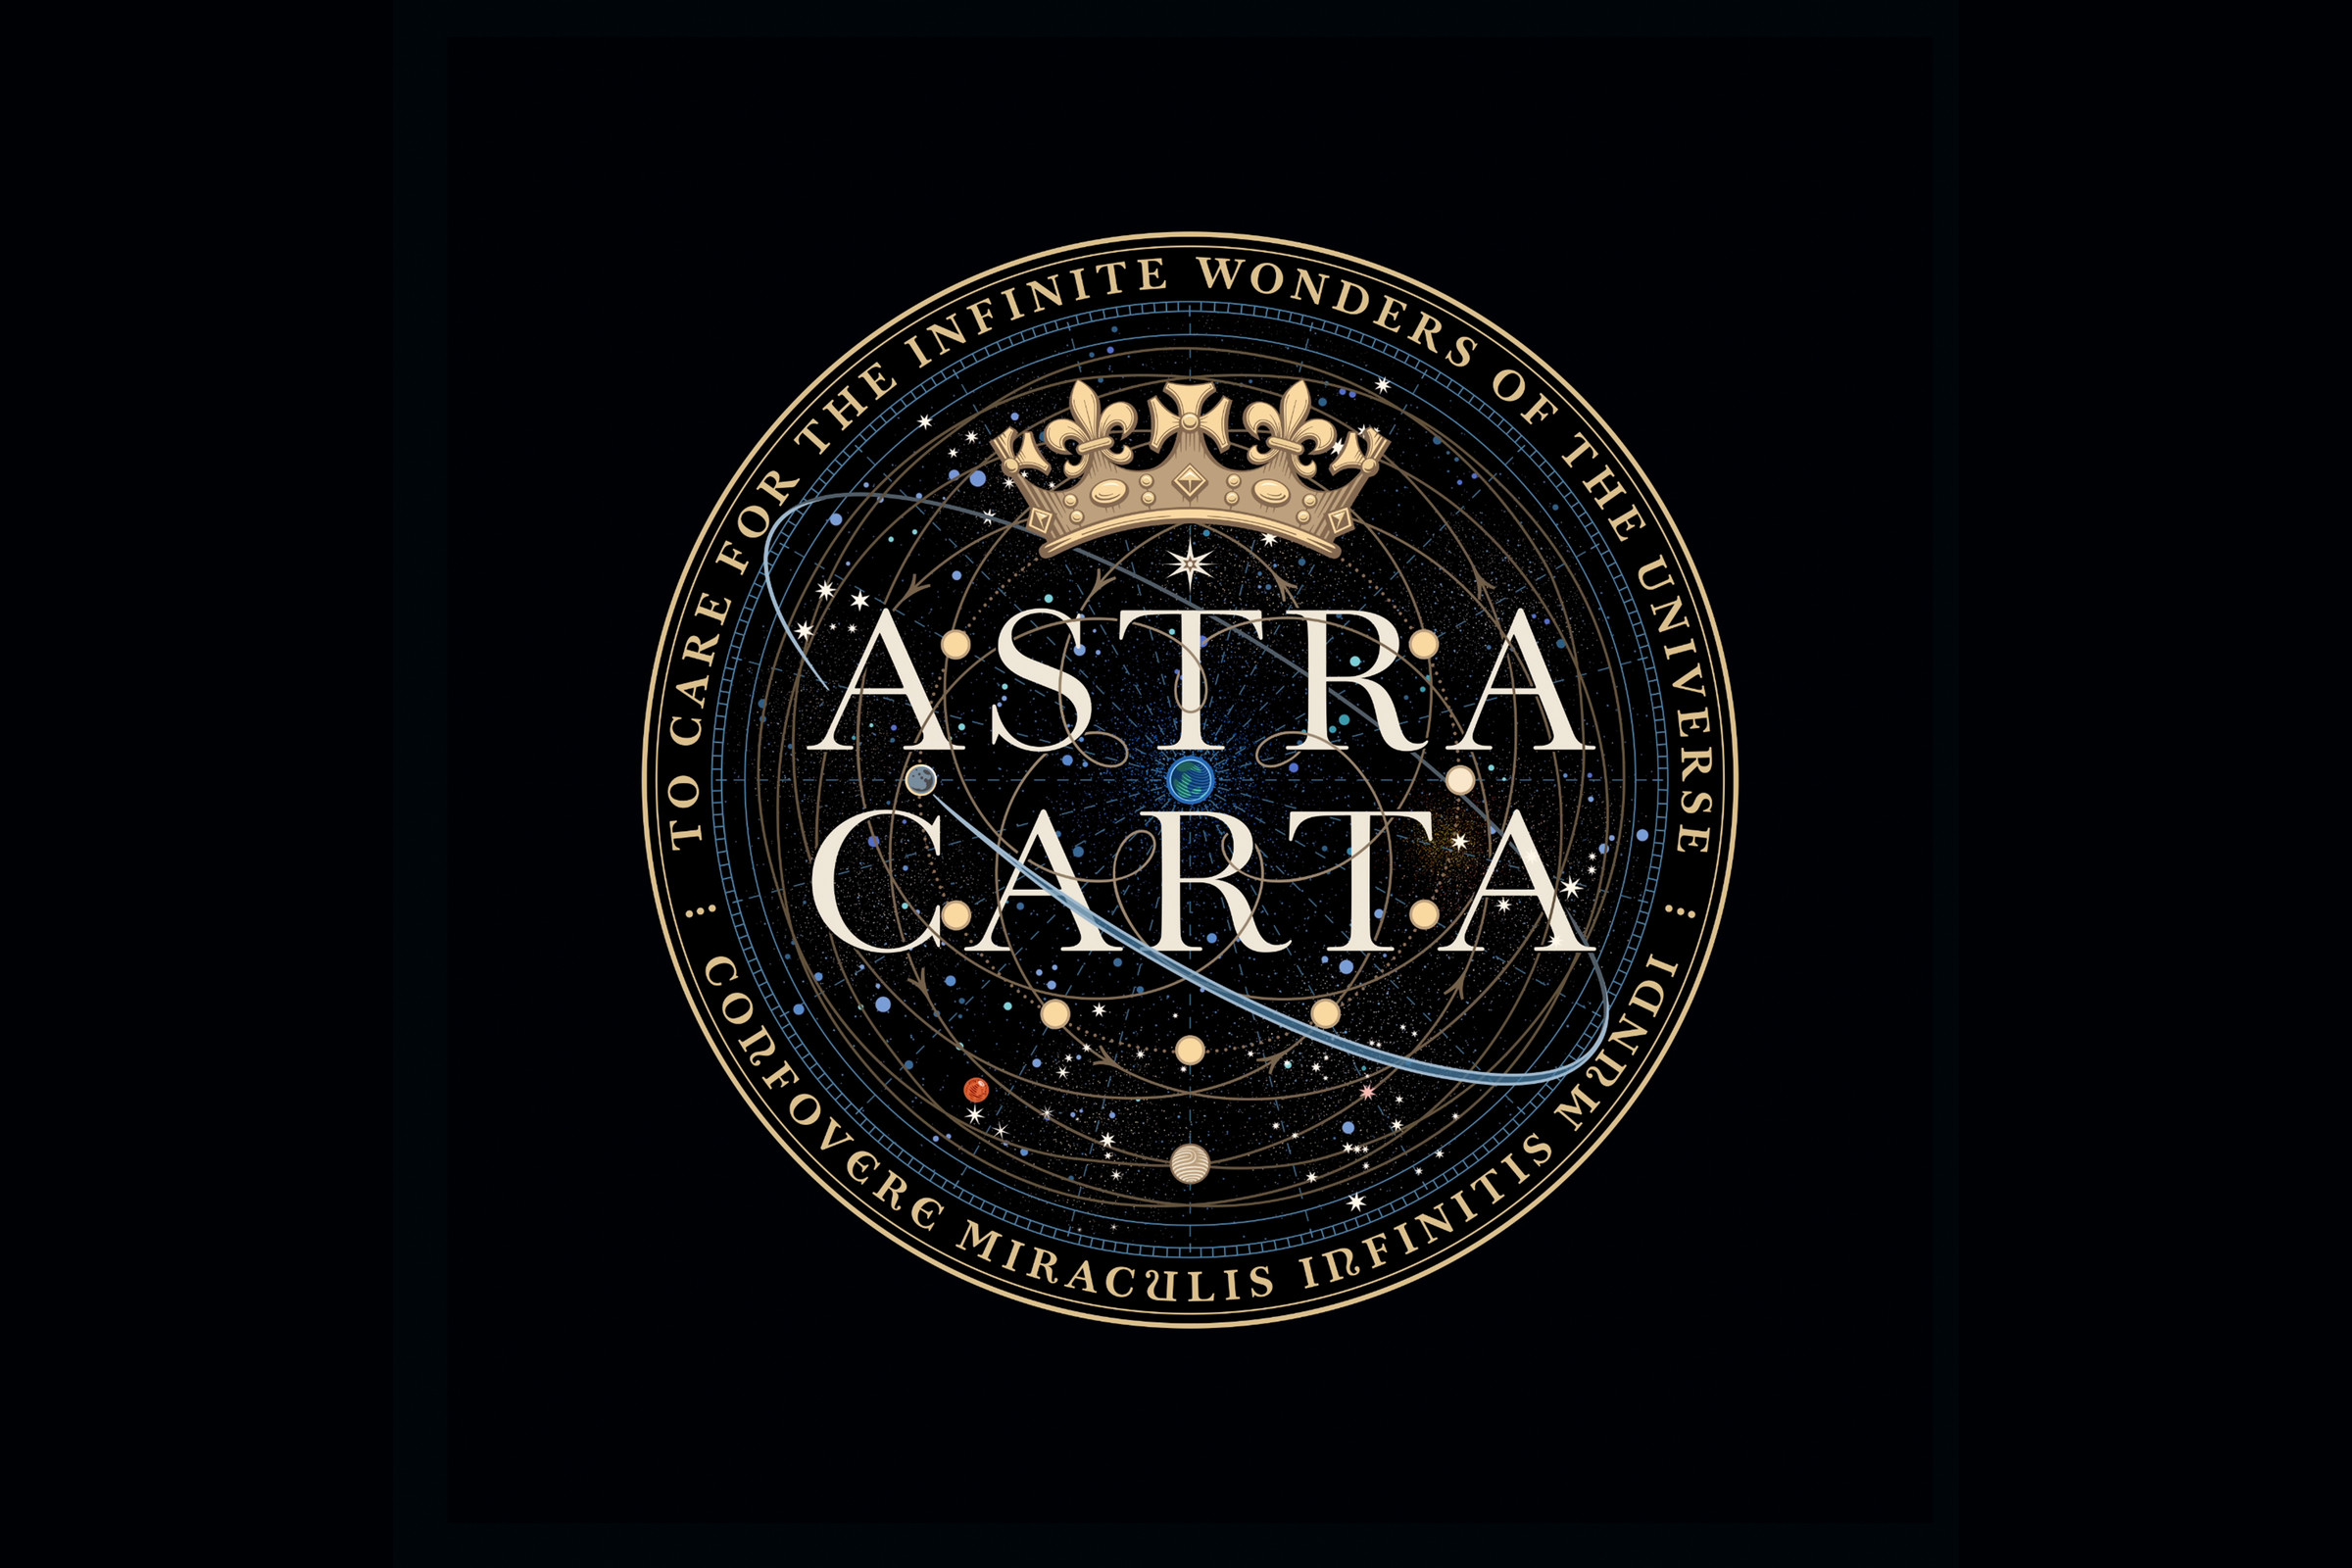 An image of the Astra Carta seal, with the words “ASTRA CARTA” in all-caps, a crown, and space imagery behind those with the Earth in the center, the Sun and Moon encircling them, and the path of Venus and constellations surrounding.